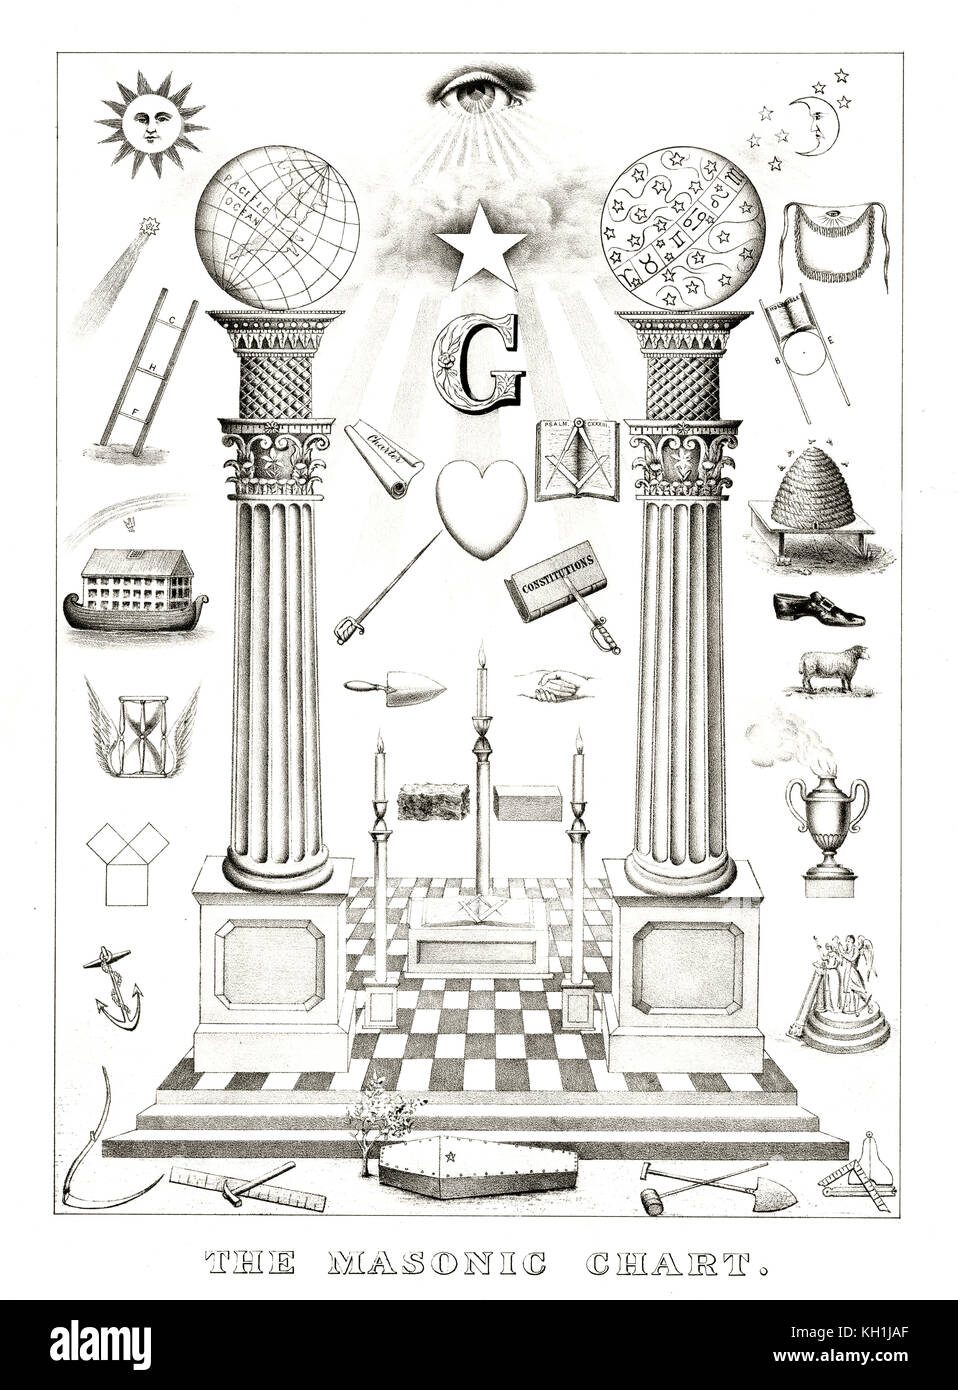 Reproduction of old Masonic chart. By Currier & Ives, publ. in New York, 1876 Stock Photo